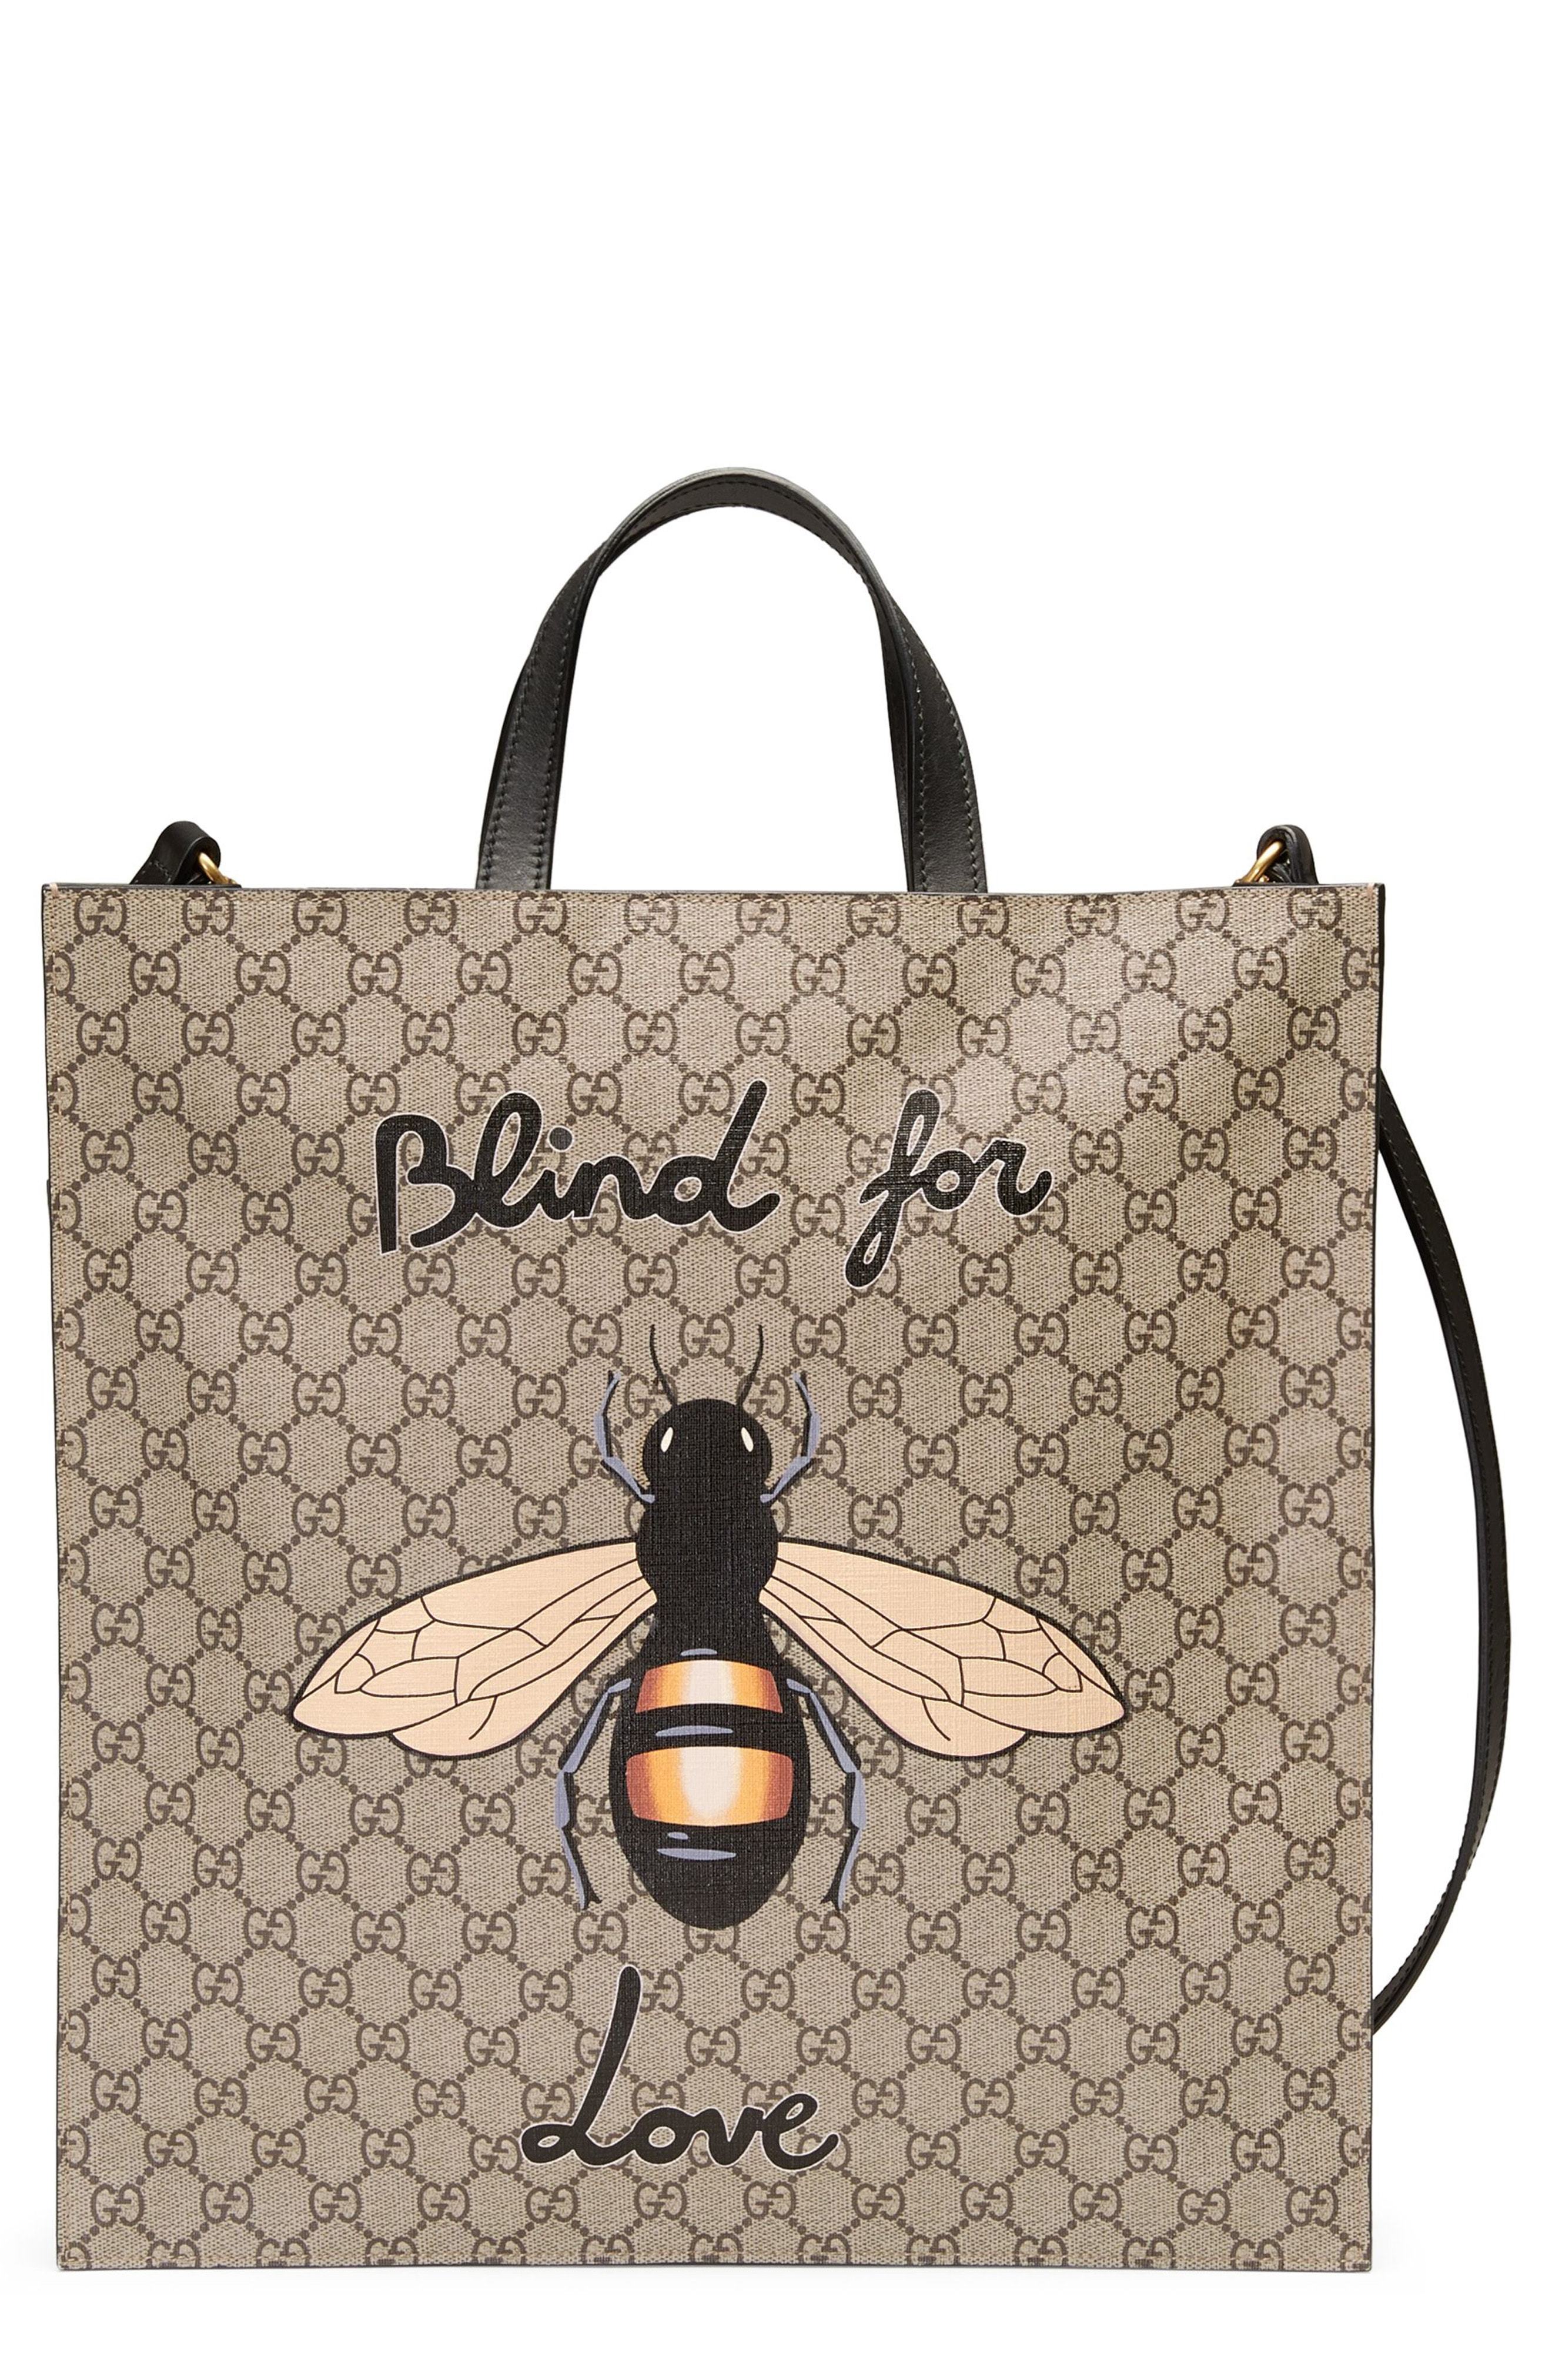 gucci bee tote bag, OFF 74%,www 